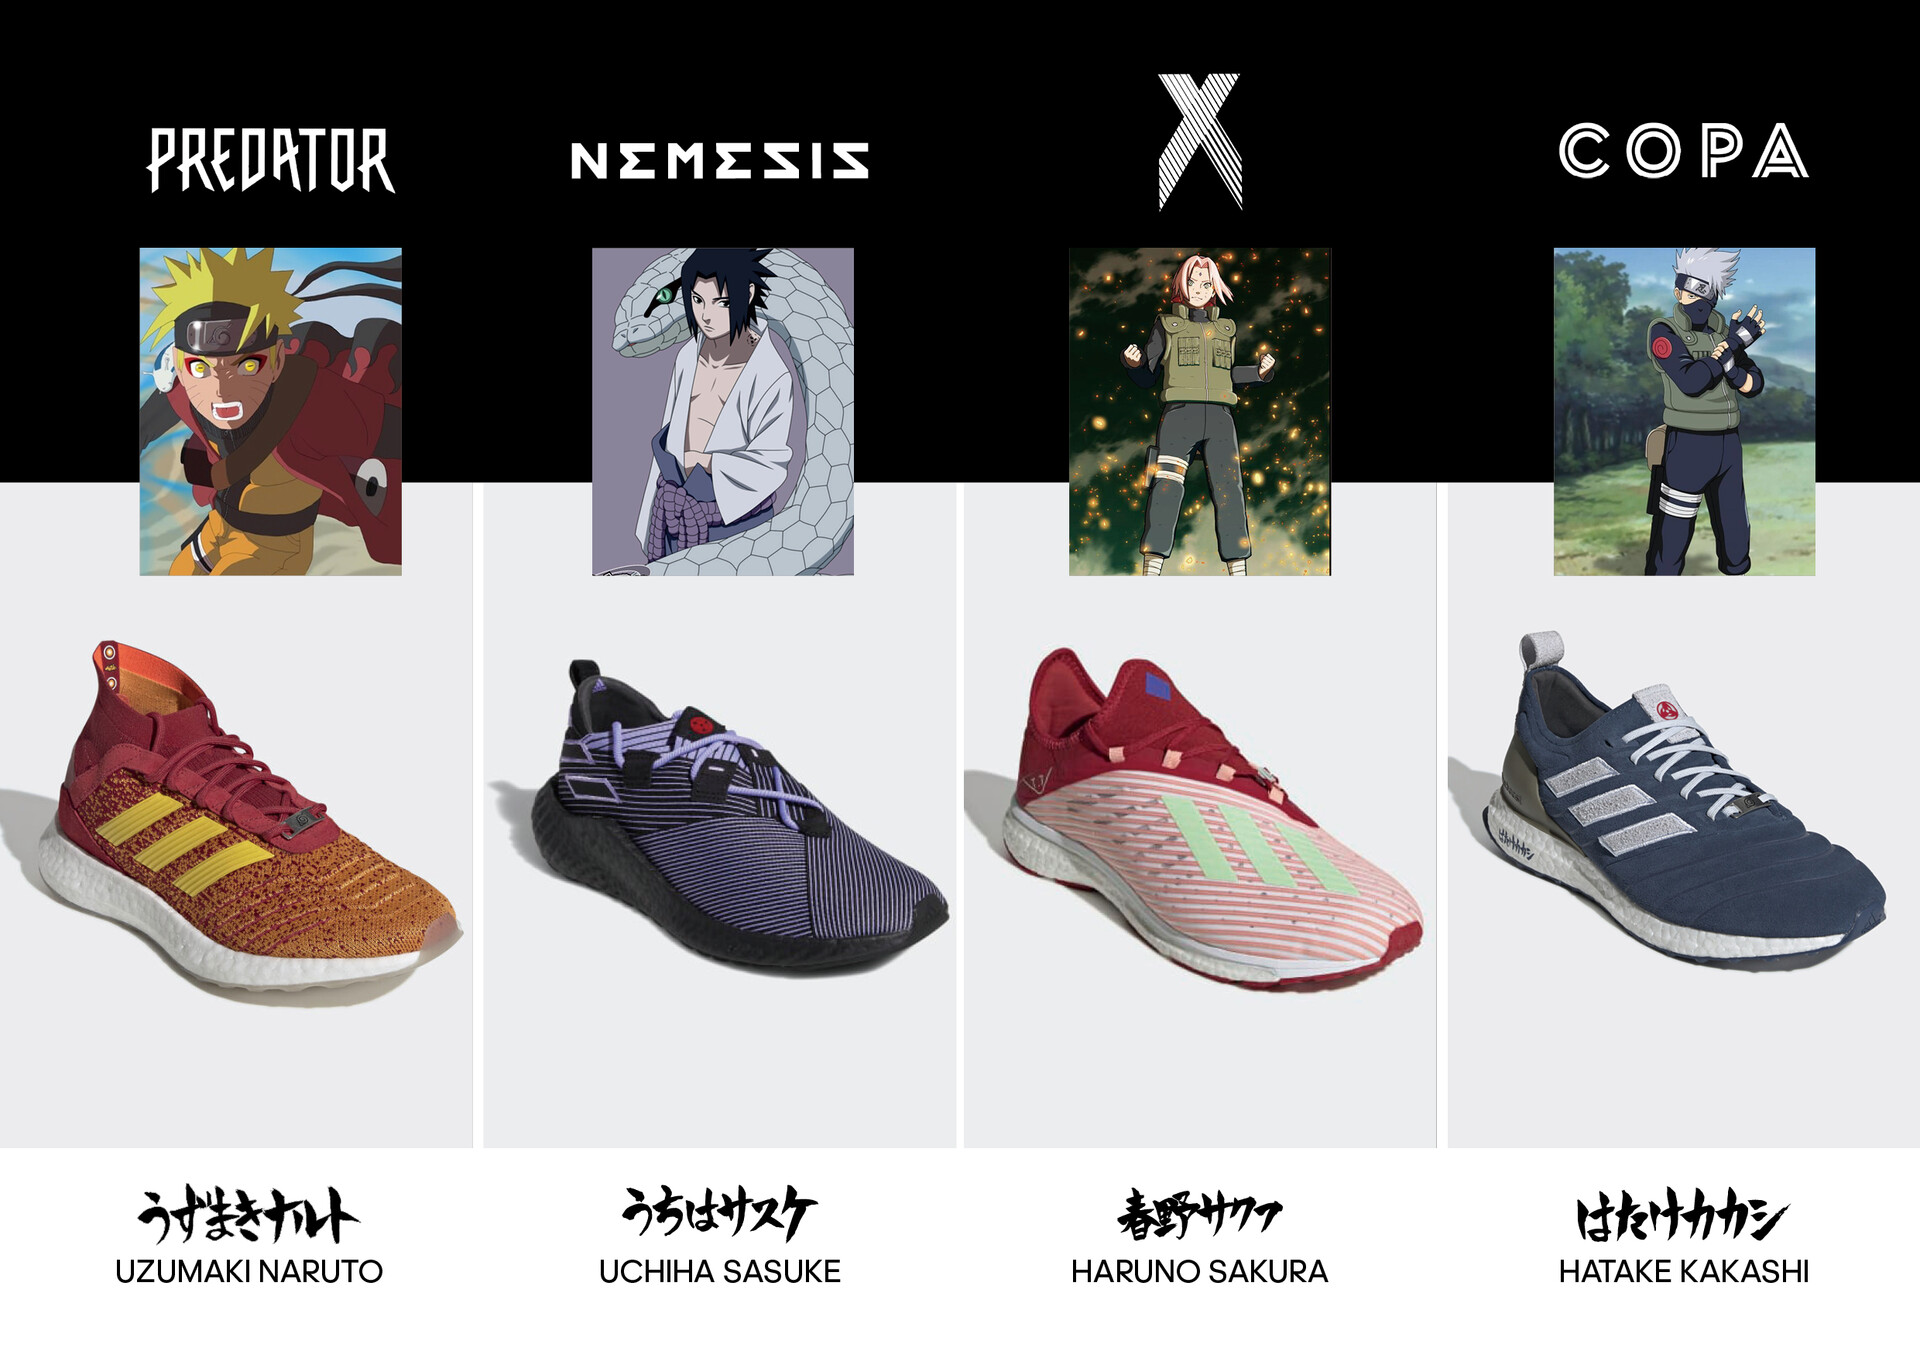 Kakashi Sneakers From Naruto x Adidas COPA UltraBOOST Collab Revealed